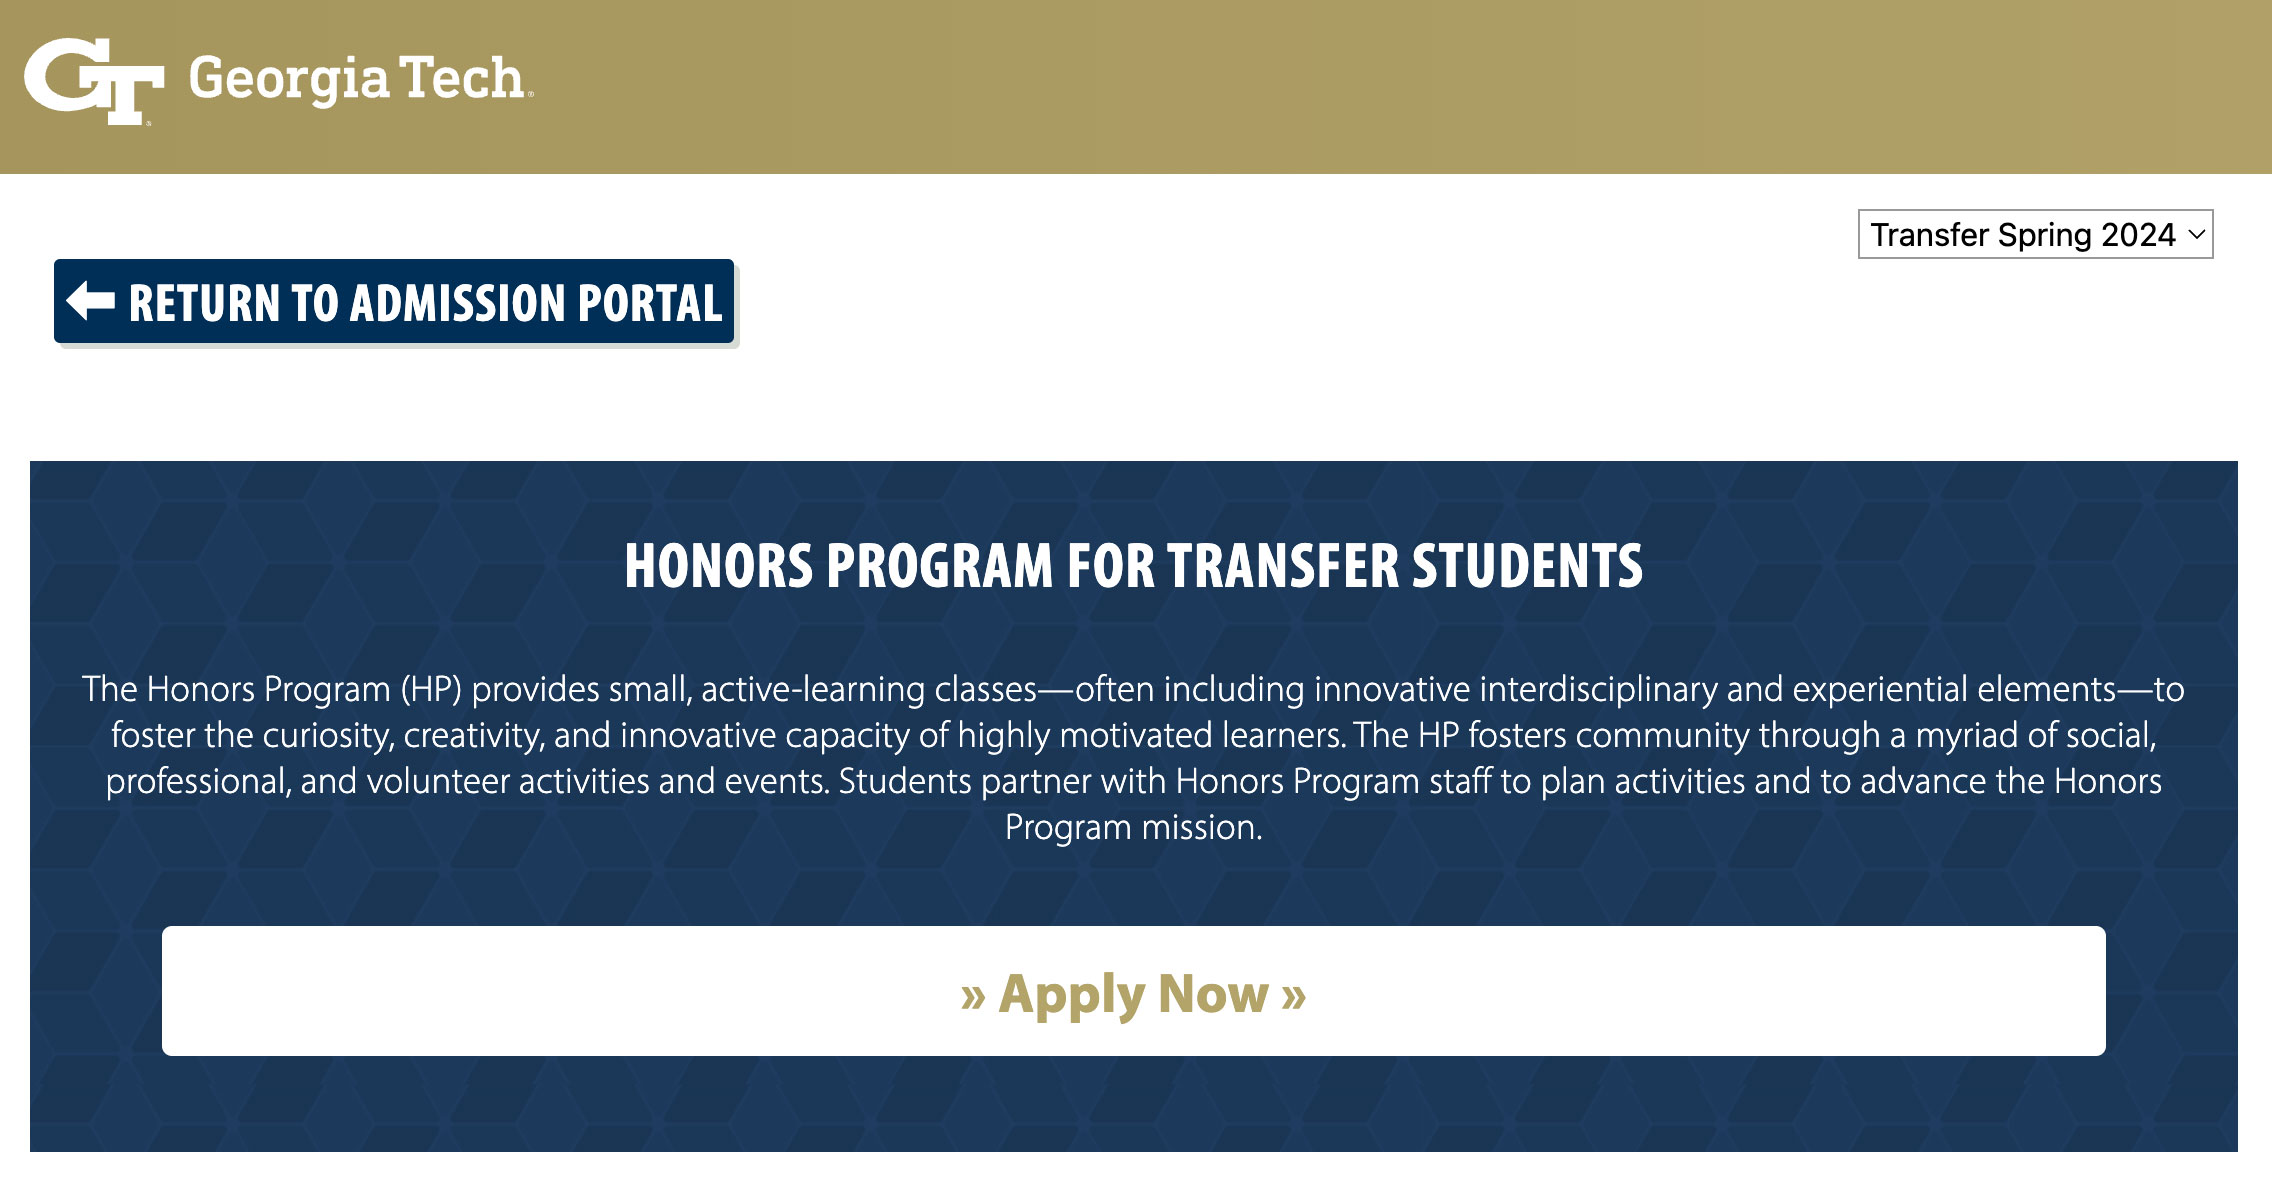 Image of the application portal for transfer students.